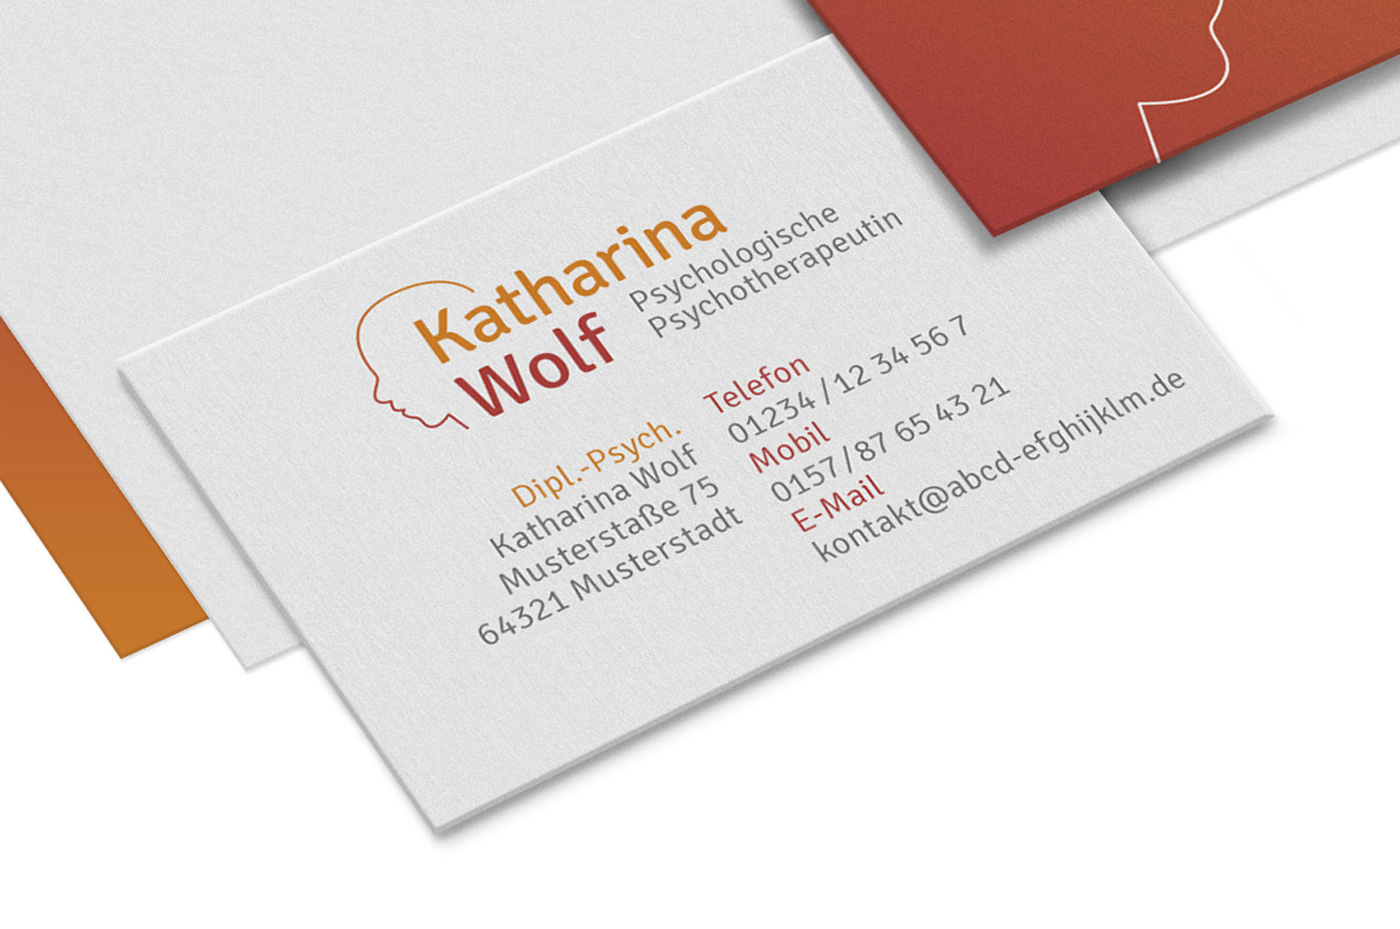 psychotherapy psychology Corporate Design logo business card stationary head gradient orange red